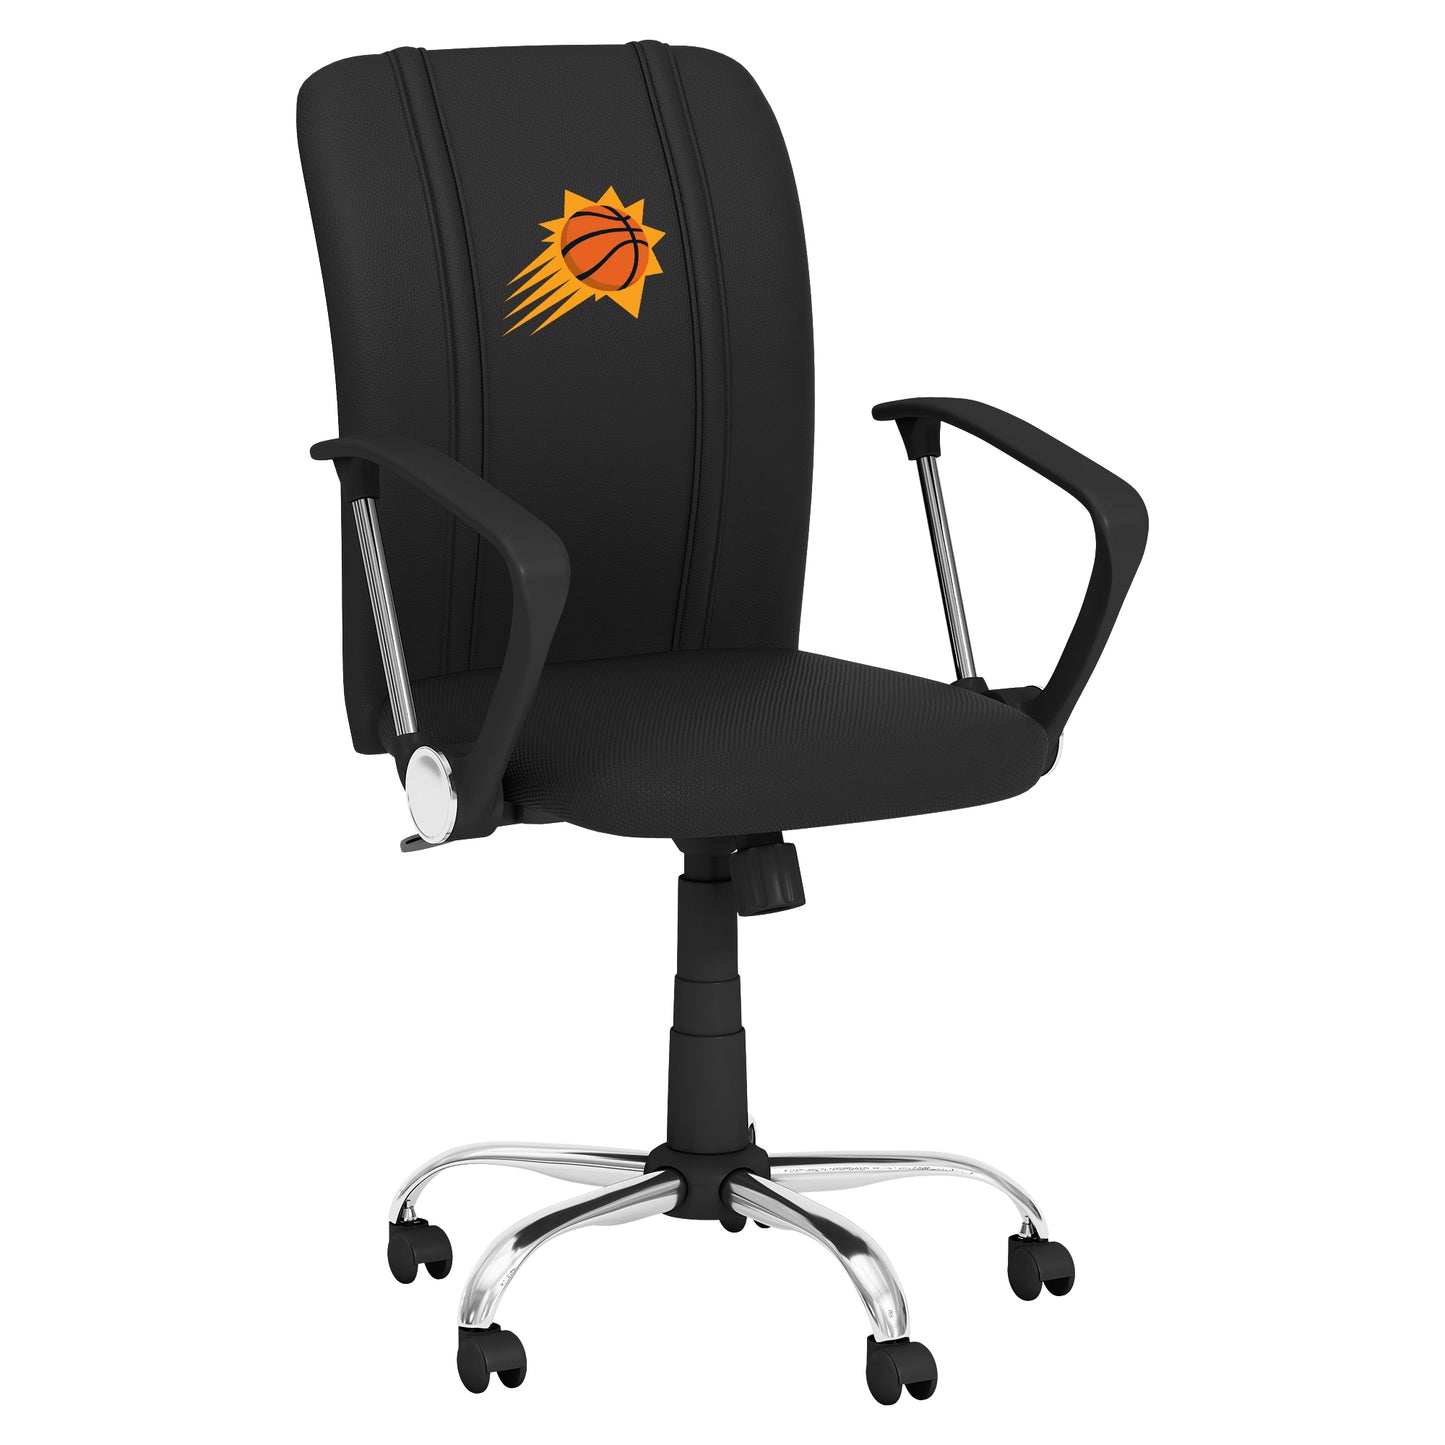 Curve Task Chair with Phoenix Suns Primary